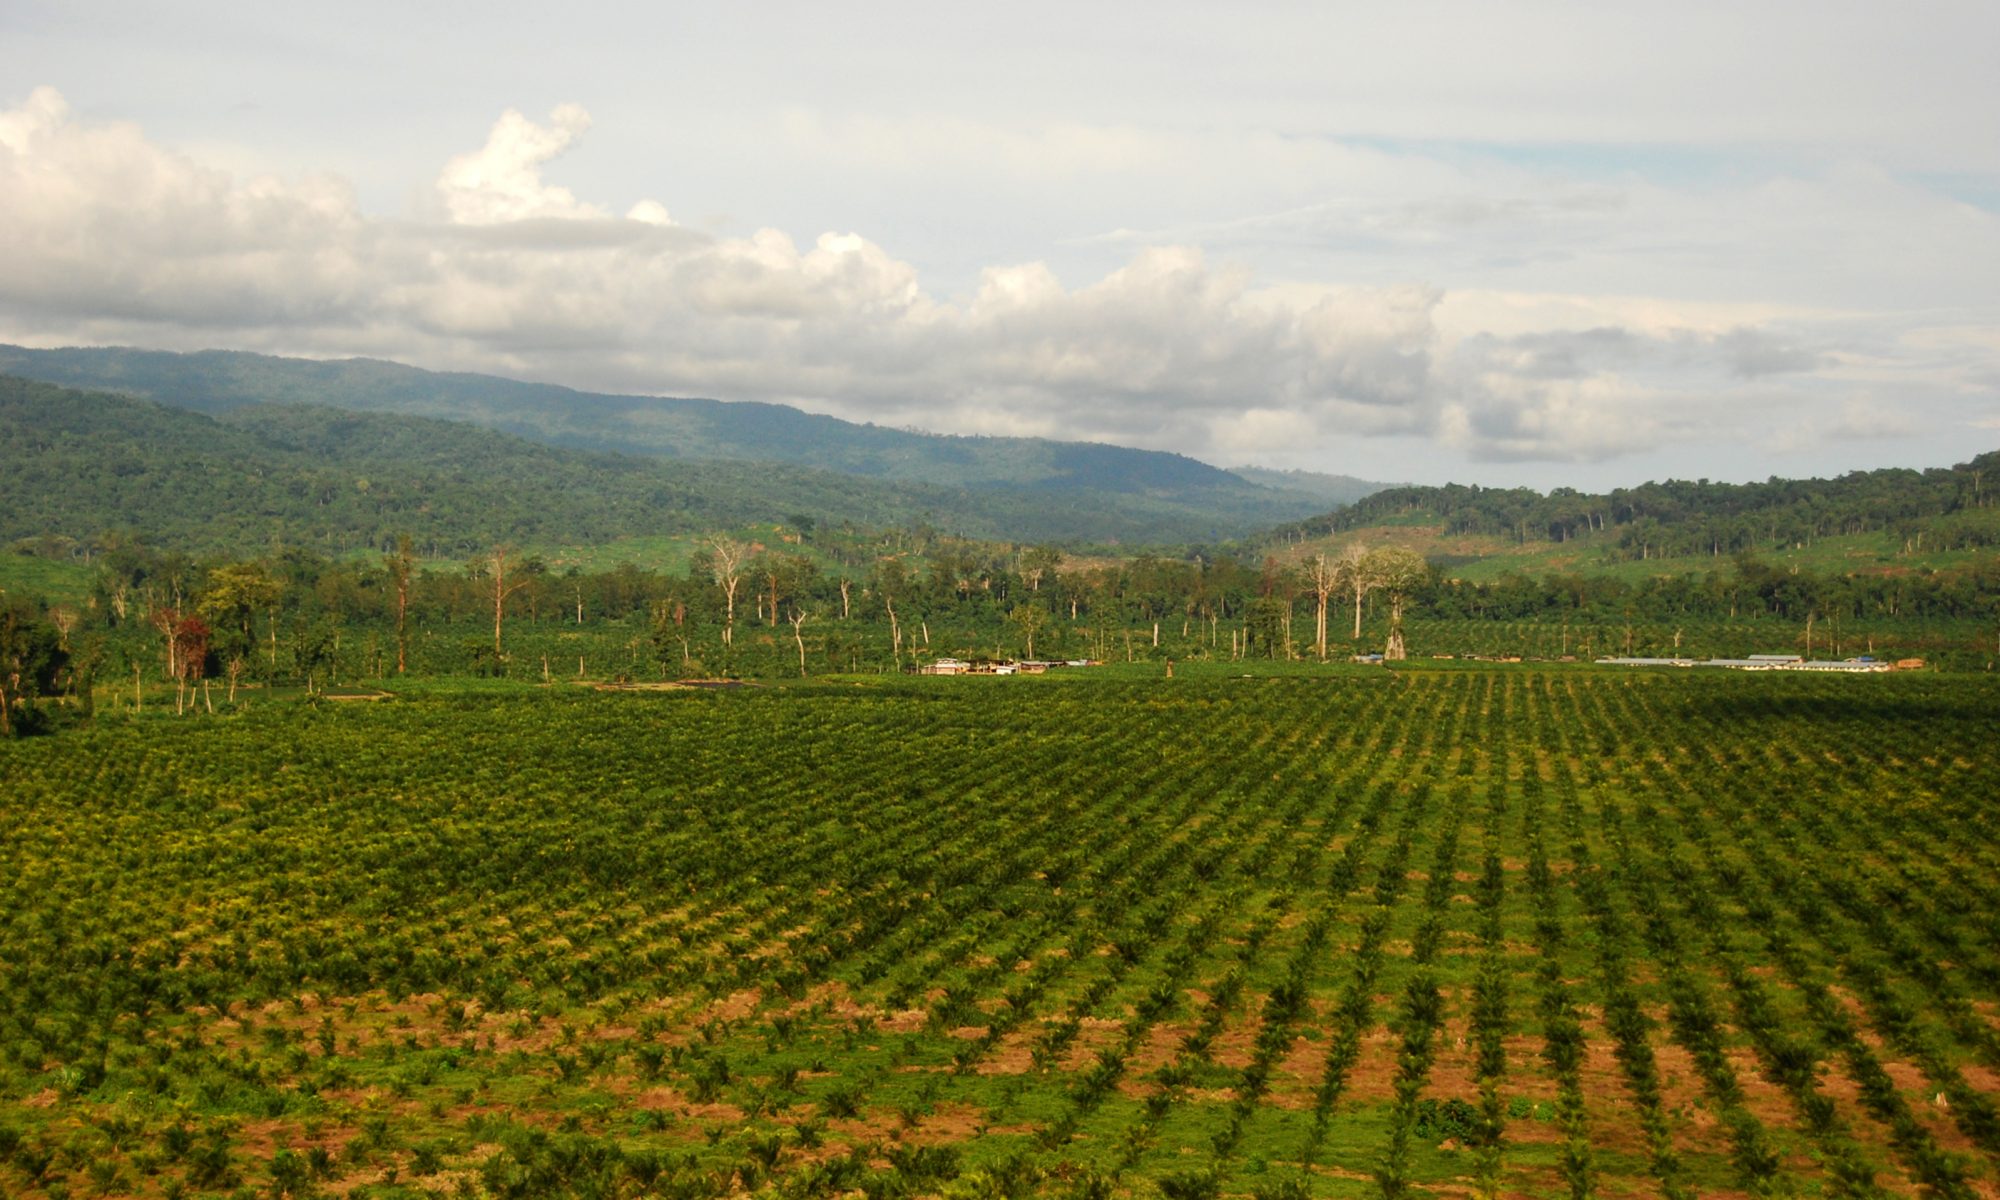 An oil palm plantation with straight rows of palms. In the back ground the plantation compound is visible and in the horizon forested hills.